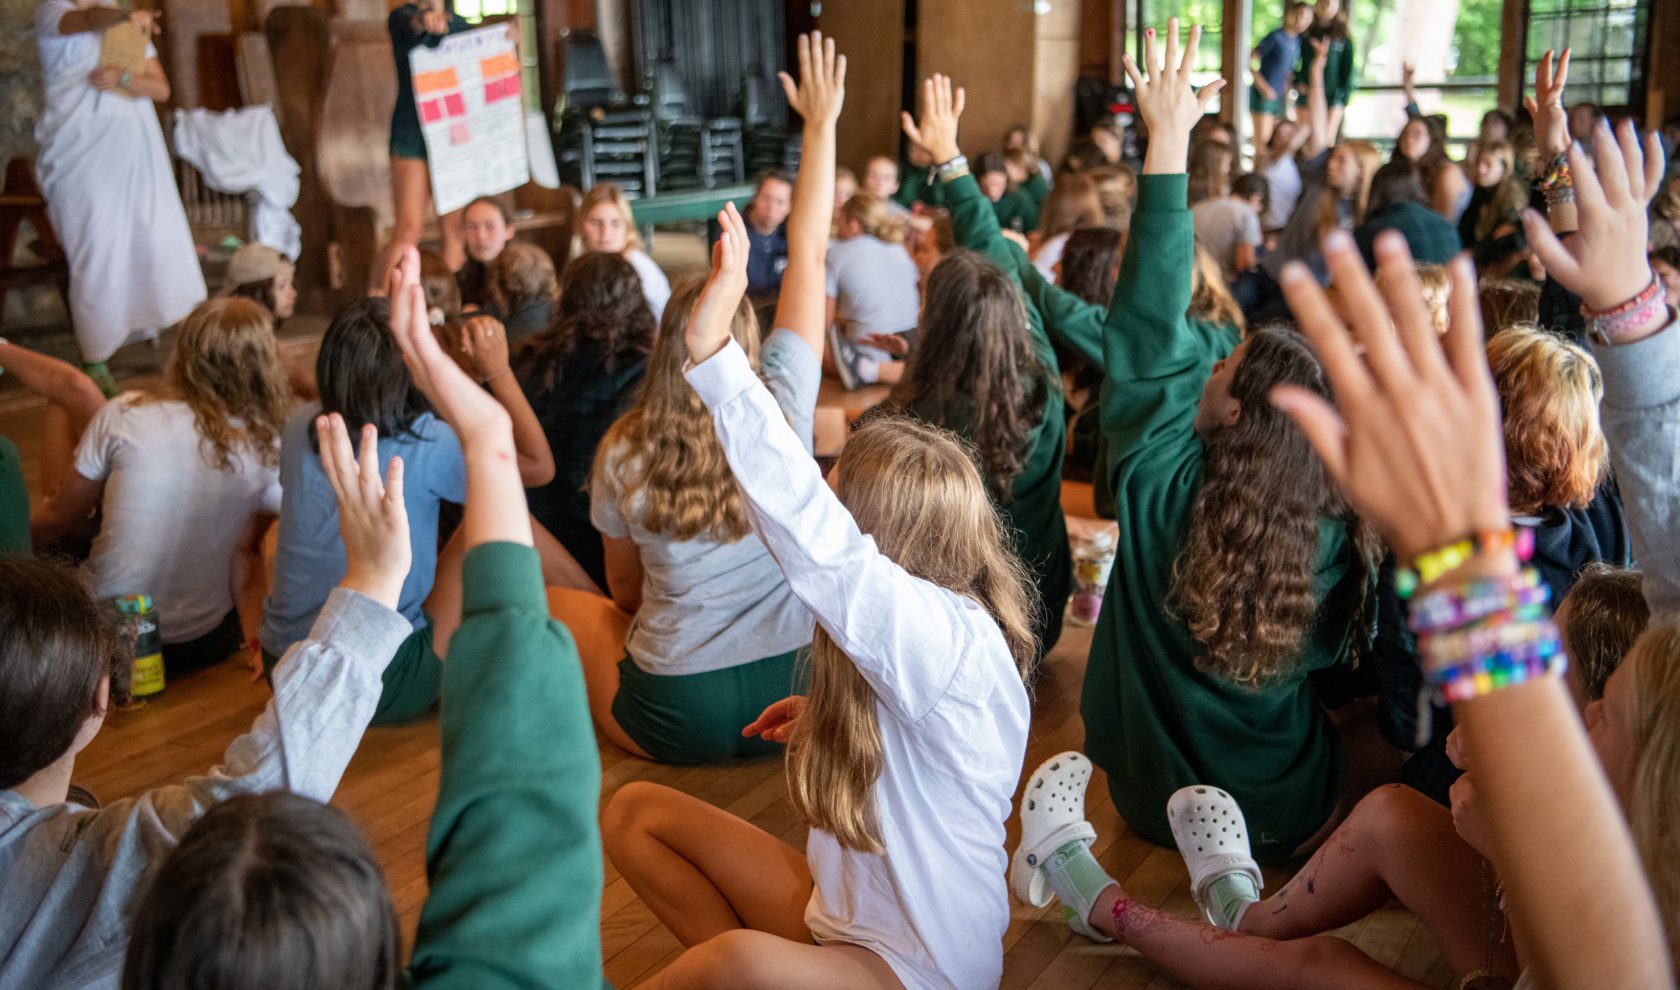 Campers raising their hands in an assembly.